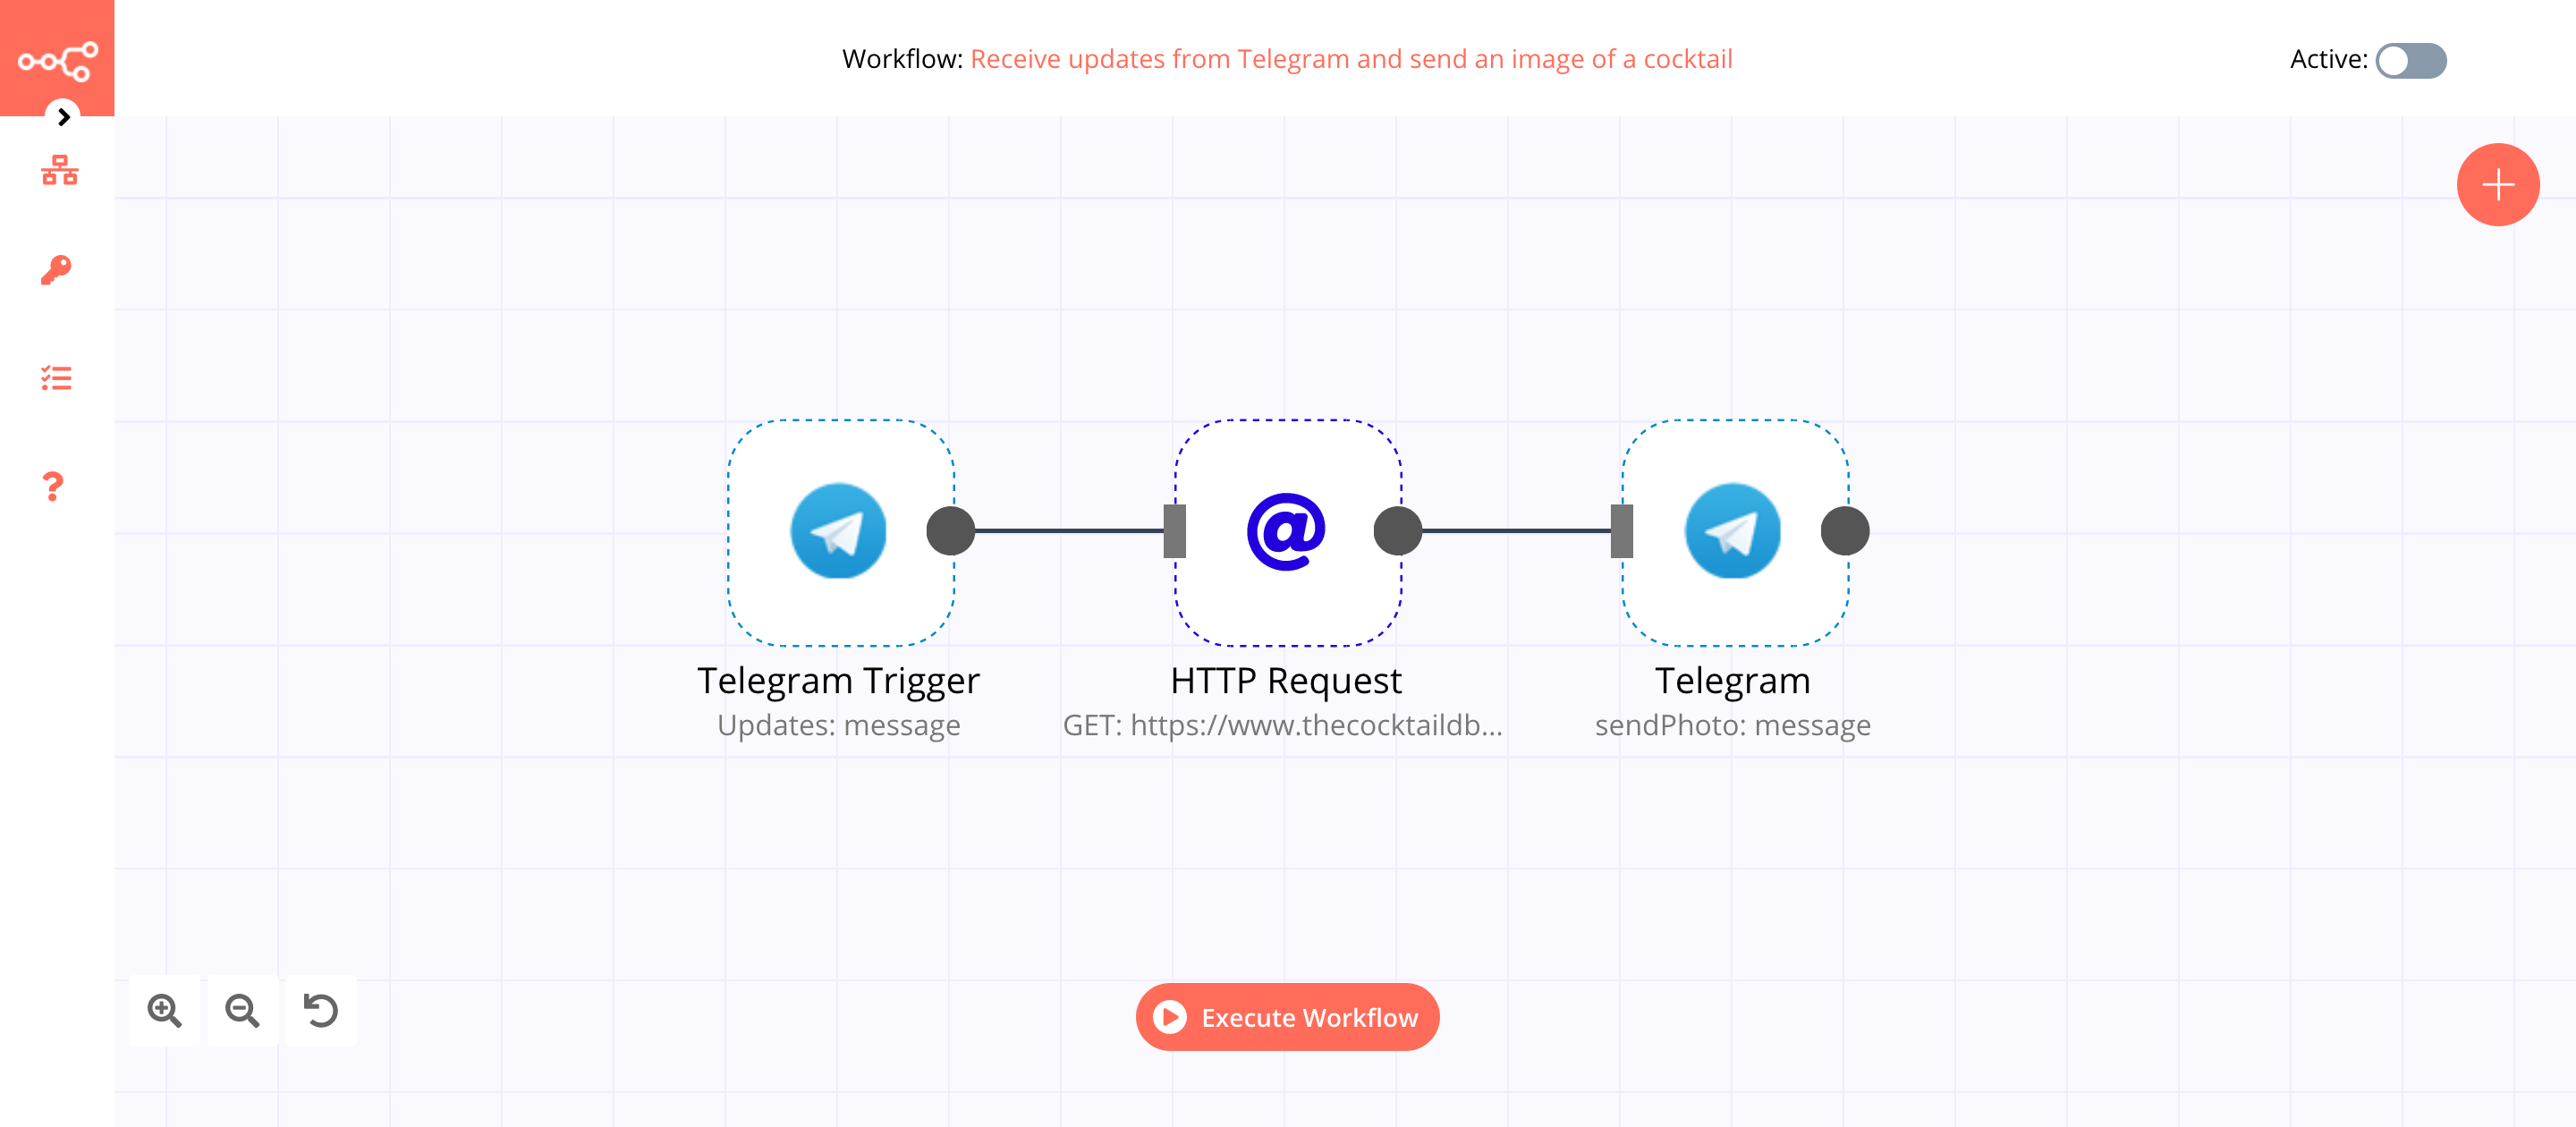 A workflow with the Telegram Trigger node